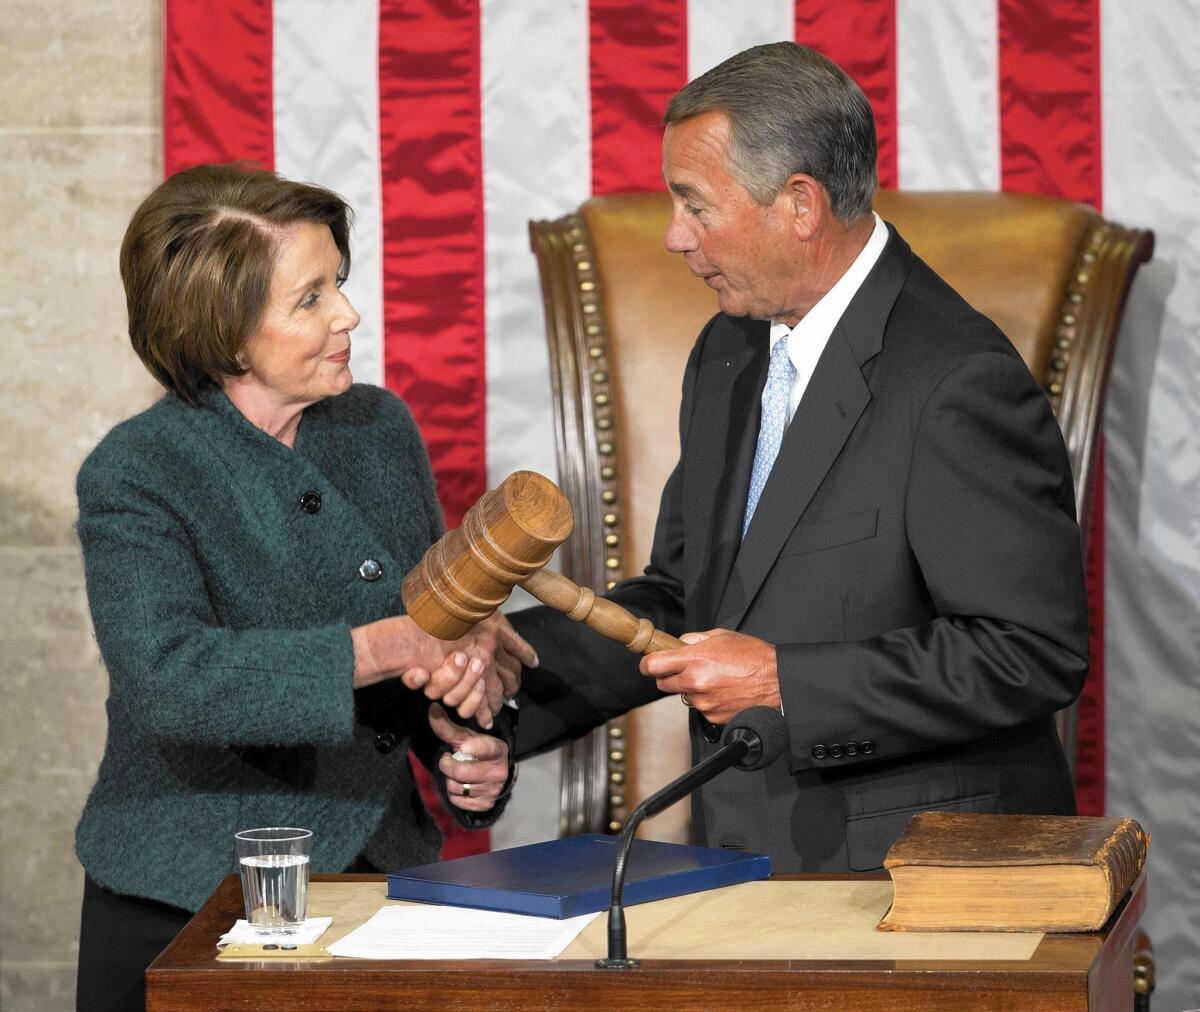 House Minority Leader Nancy Pelosi and Speaker John Boehner helped negotiate a deal to end the recurring threat of Medicare cuts facing doctors.